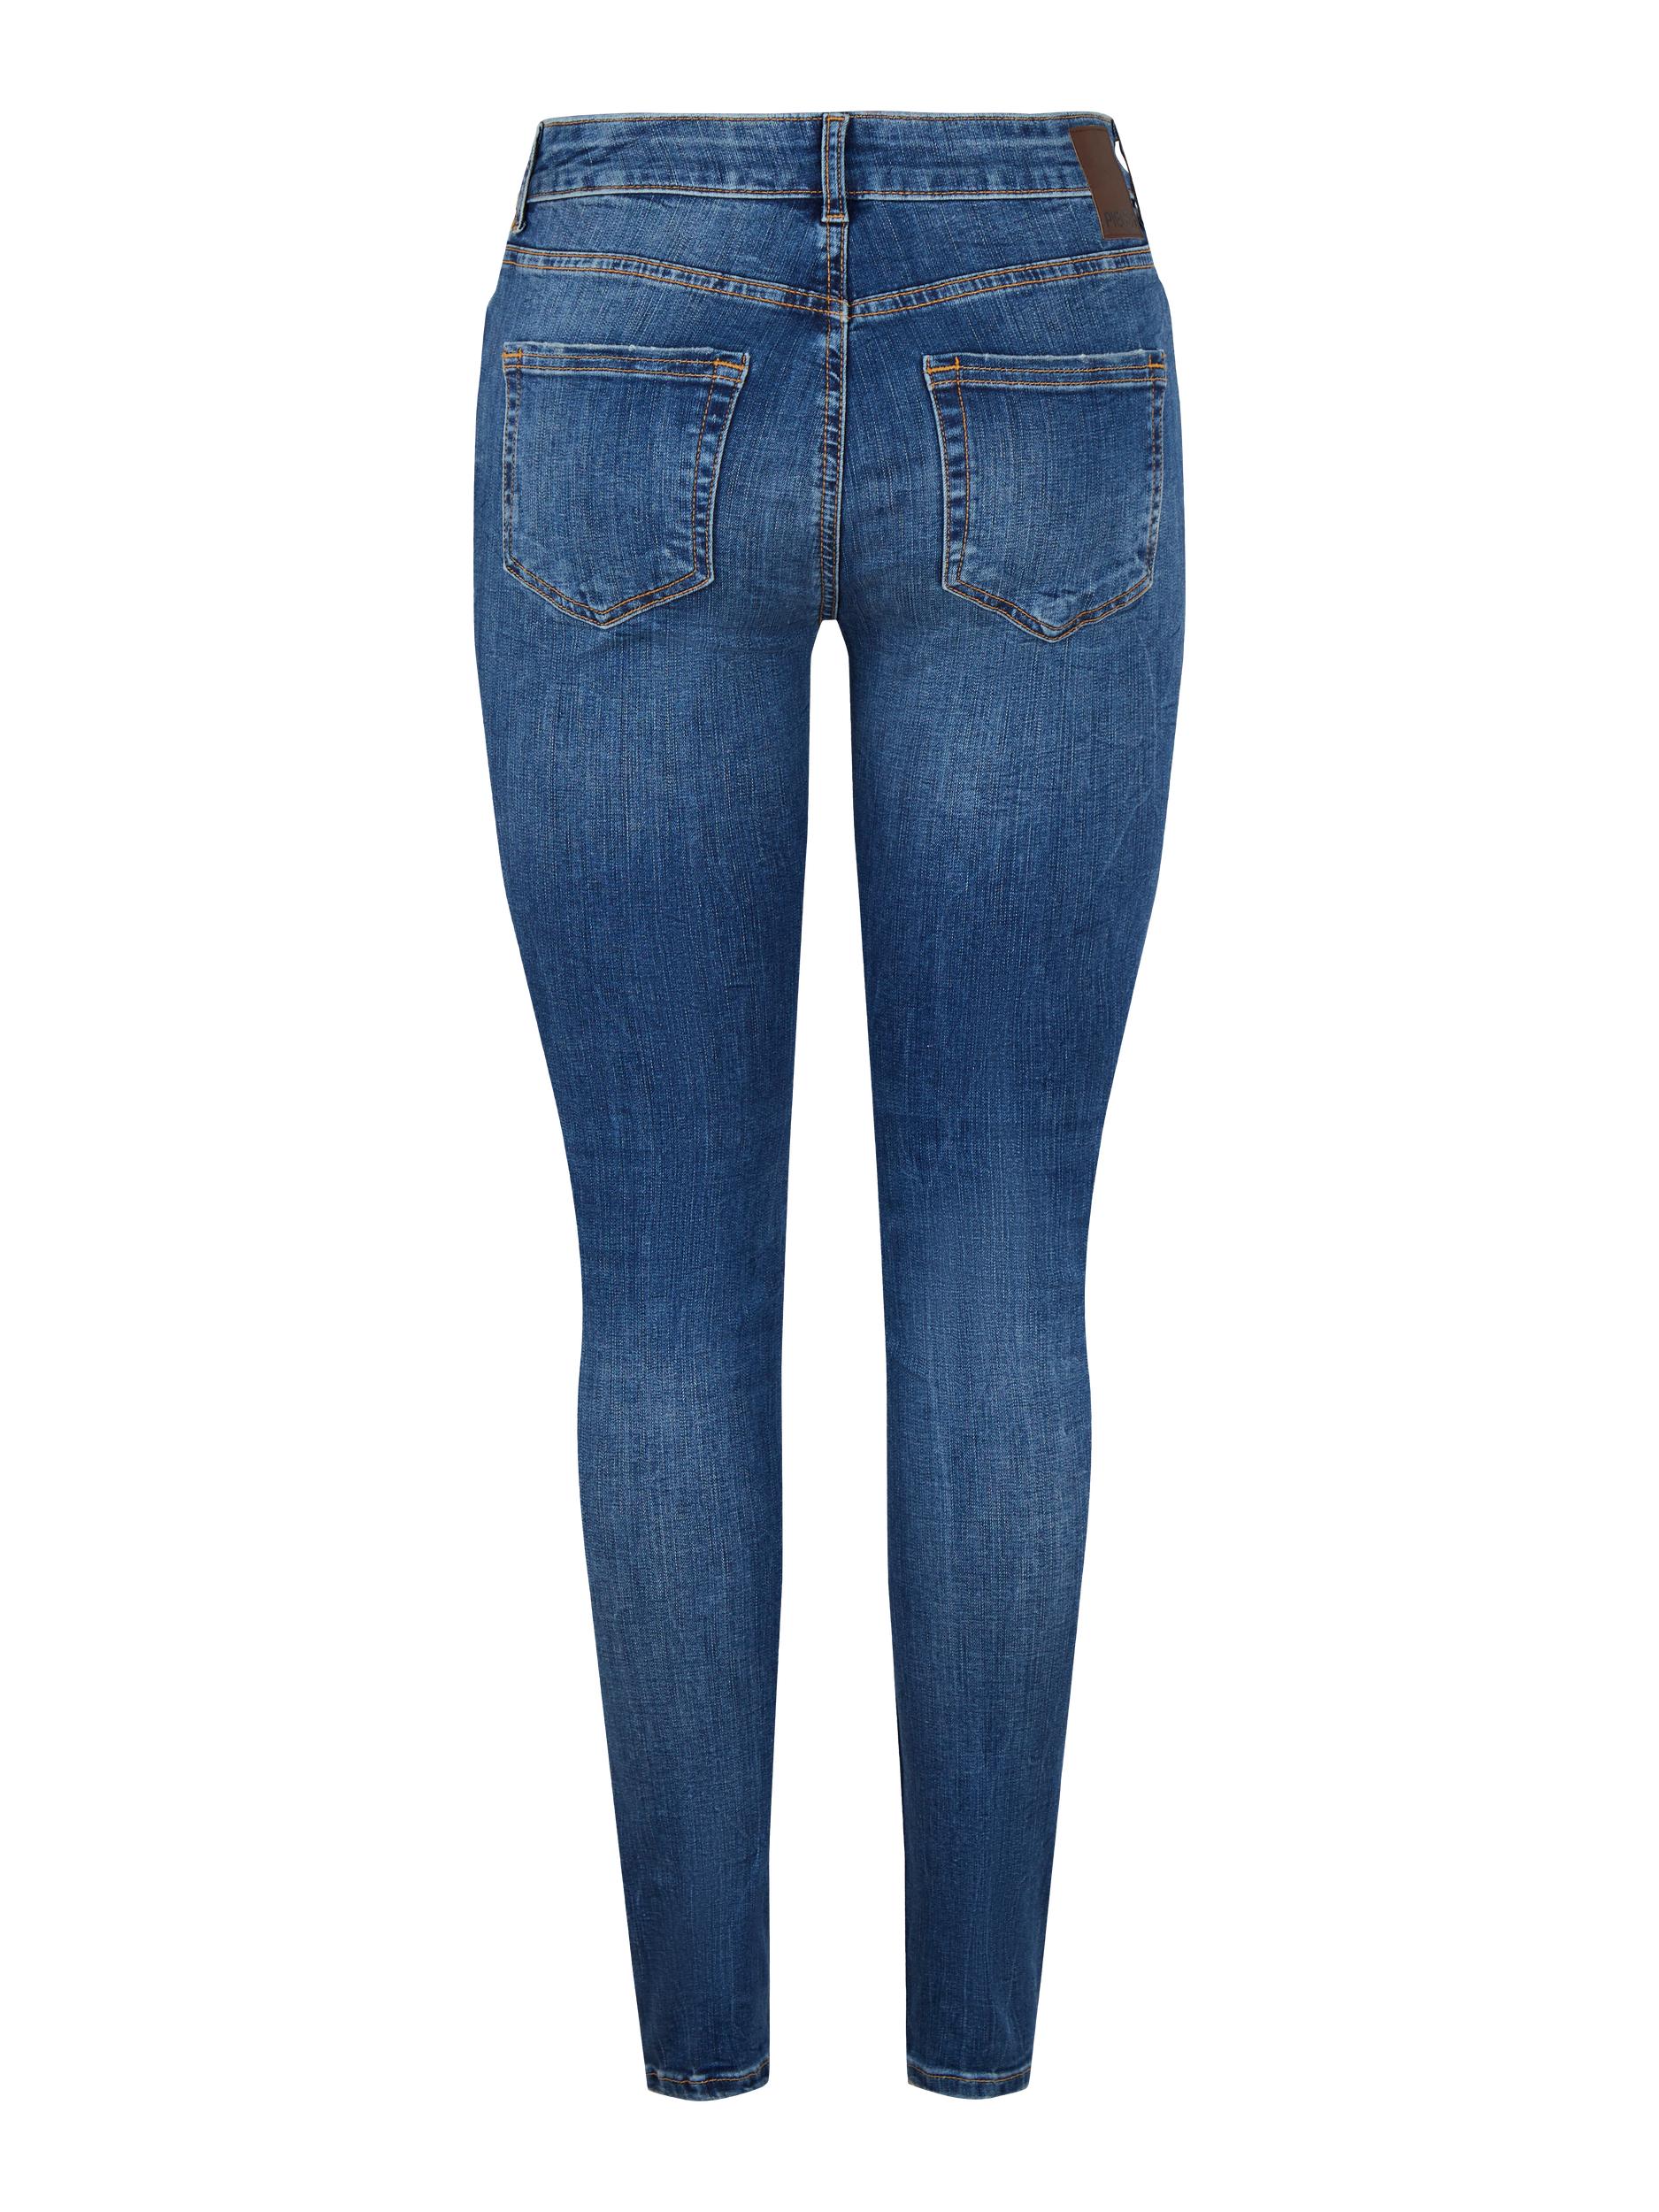 PIECES Jeans Delly in Blau 